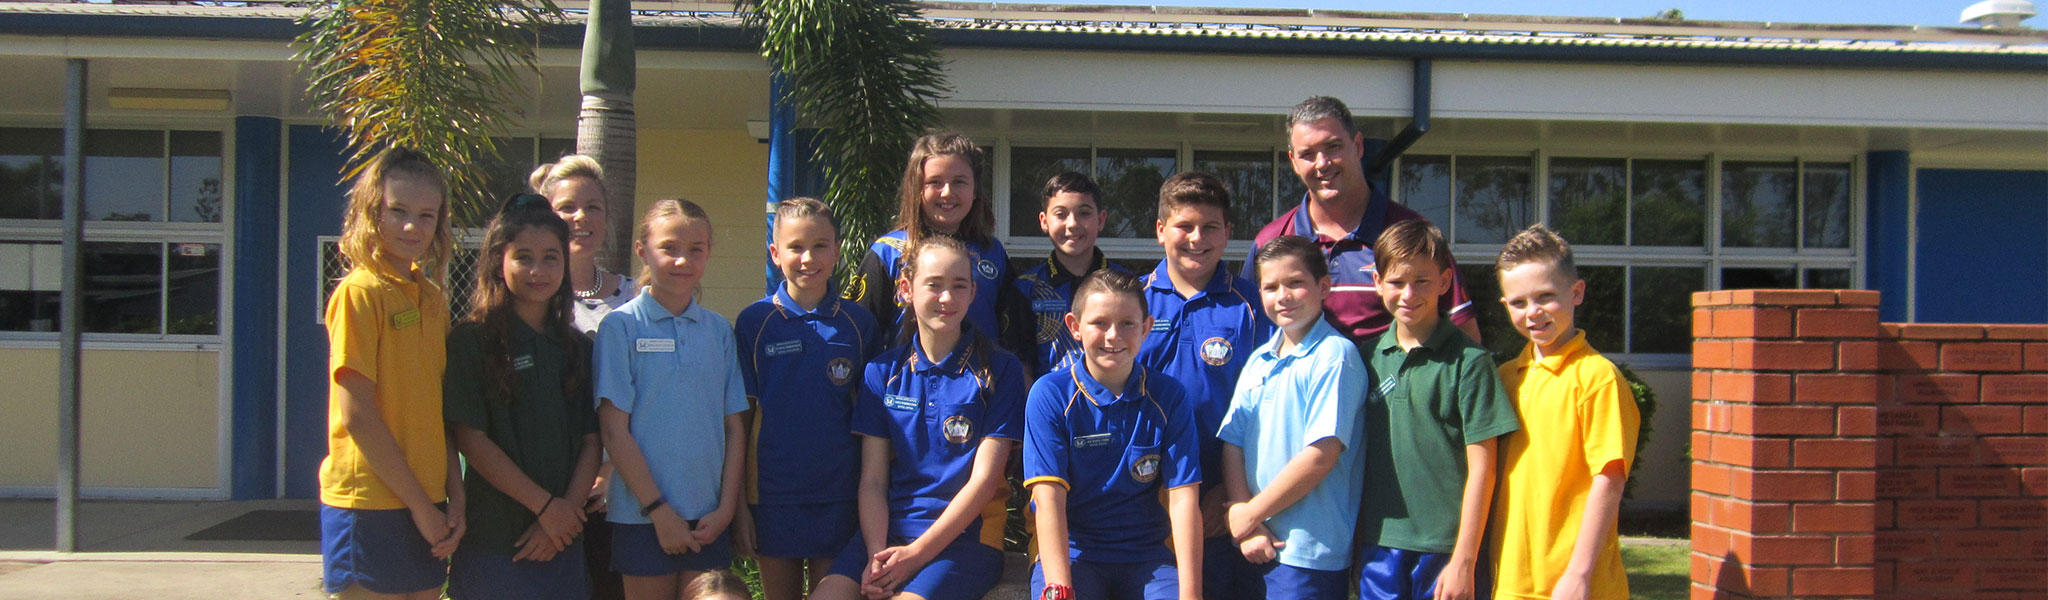 Marian State School students